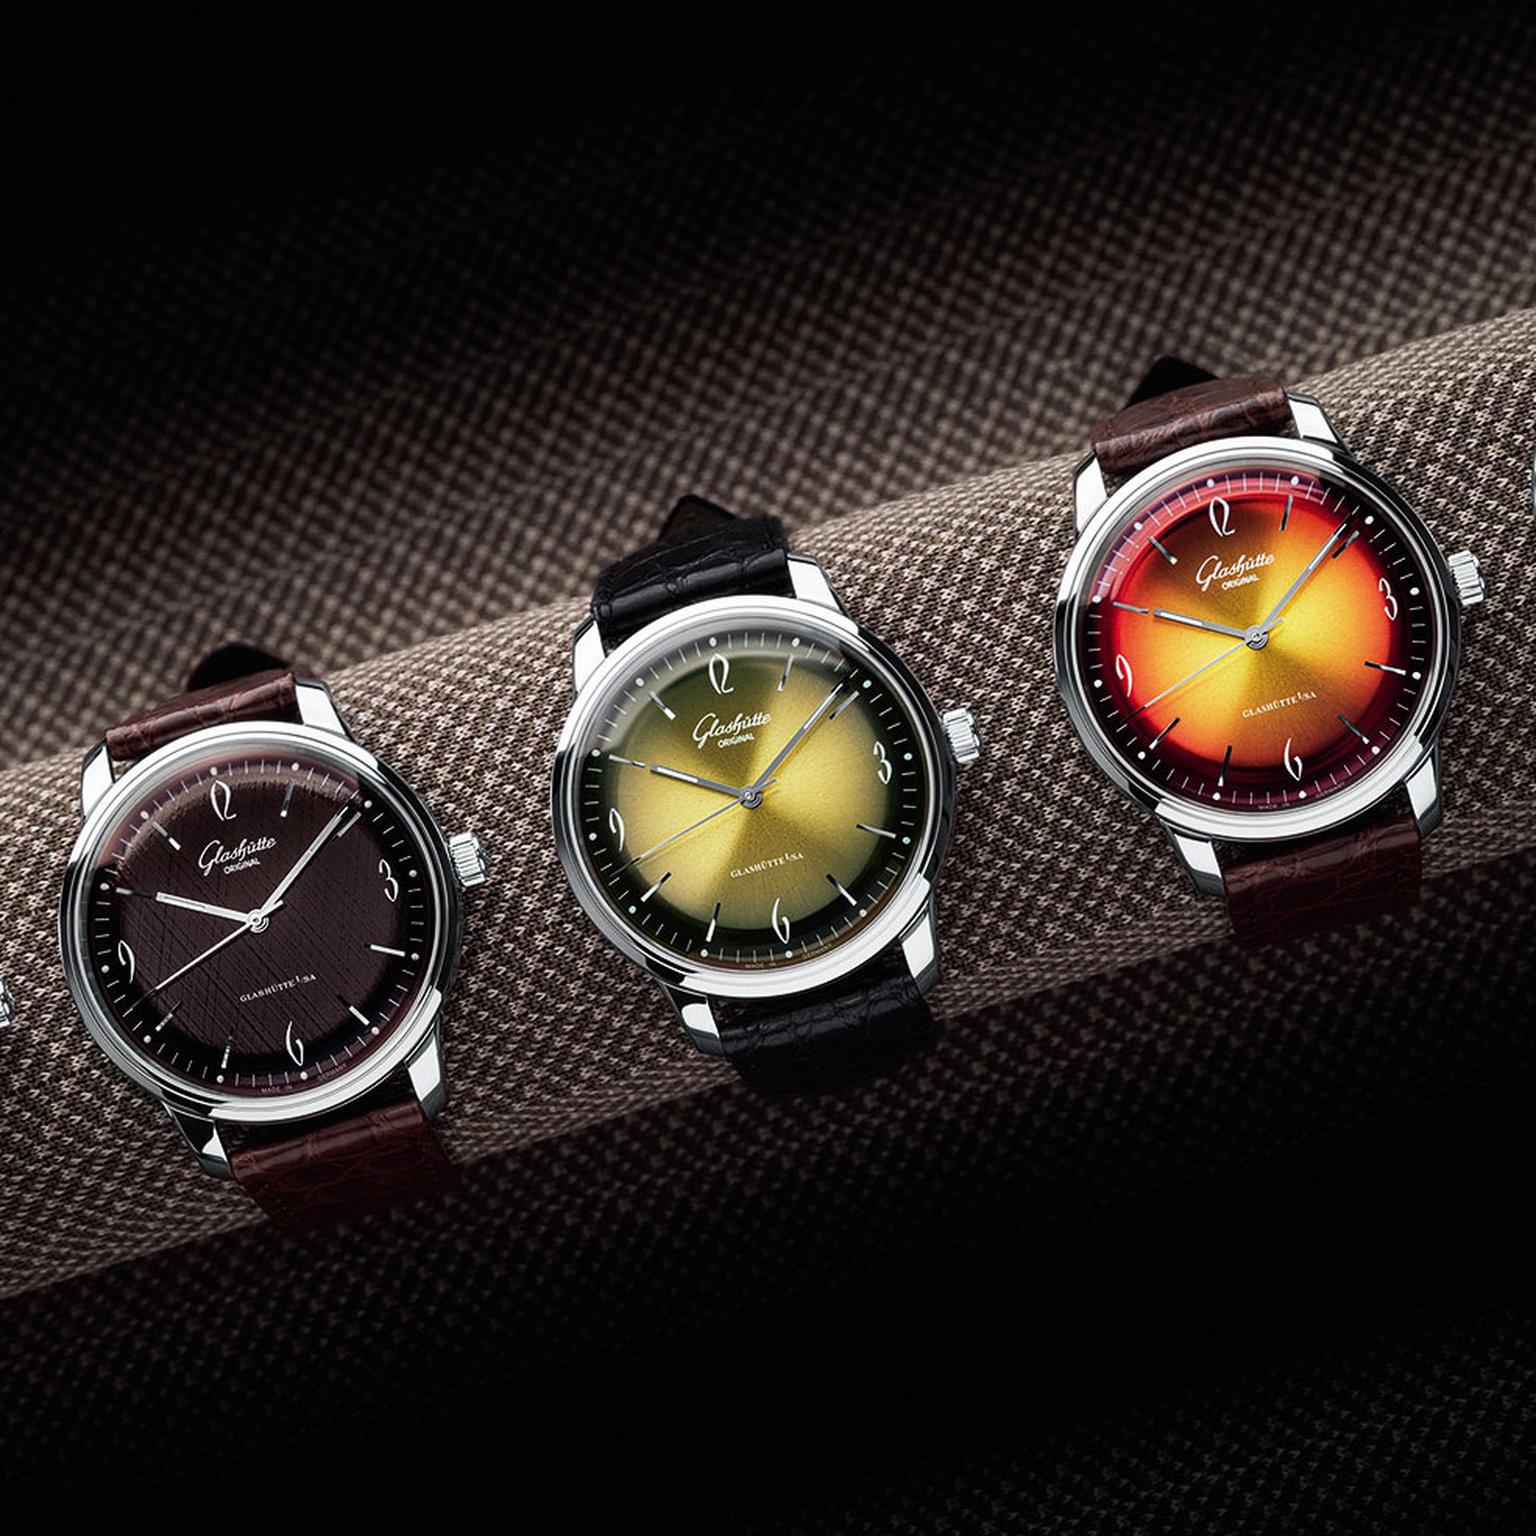 Glashutte Original Sixties Iconic Group watches